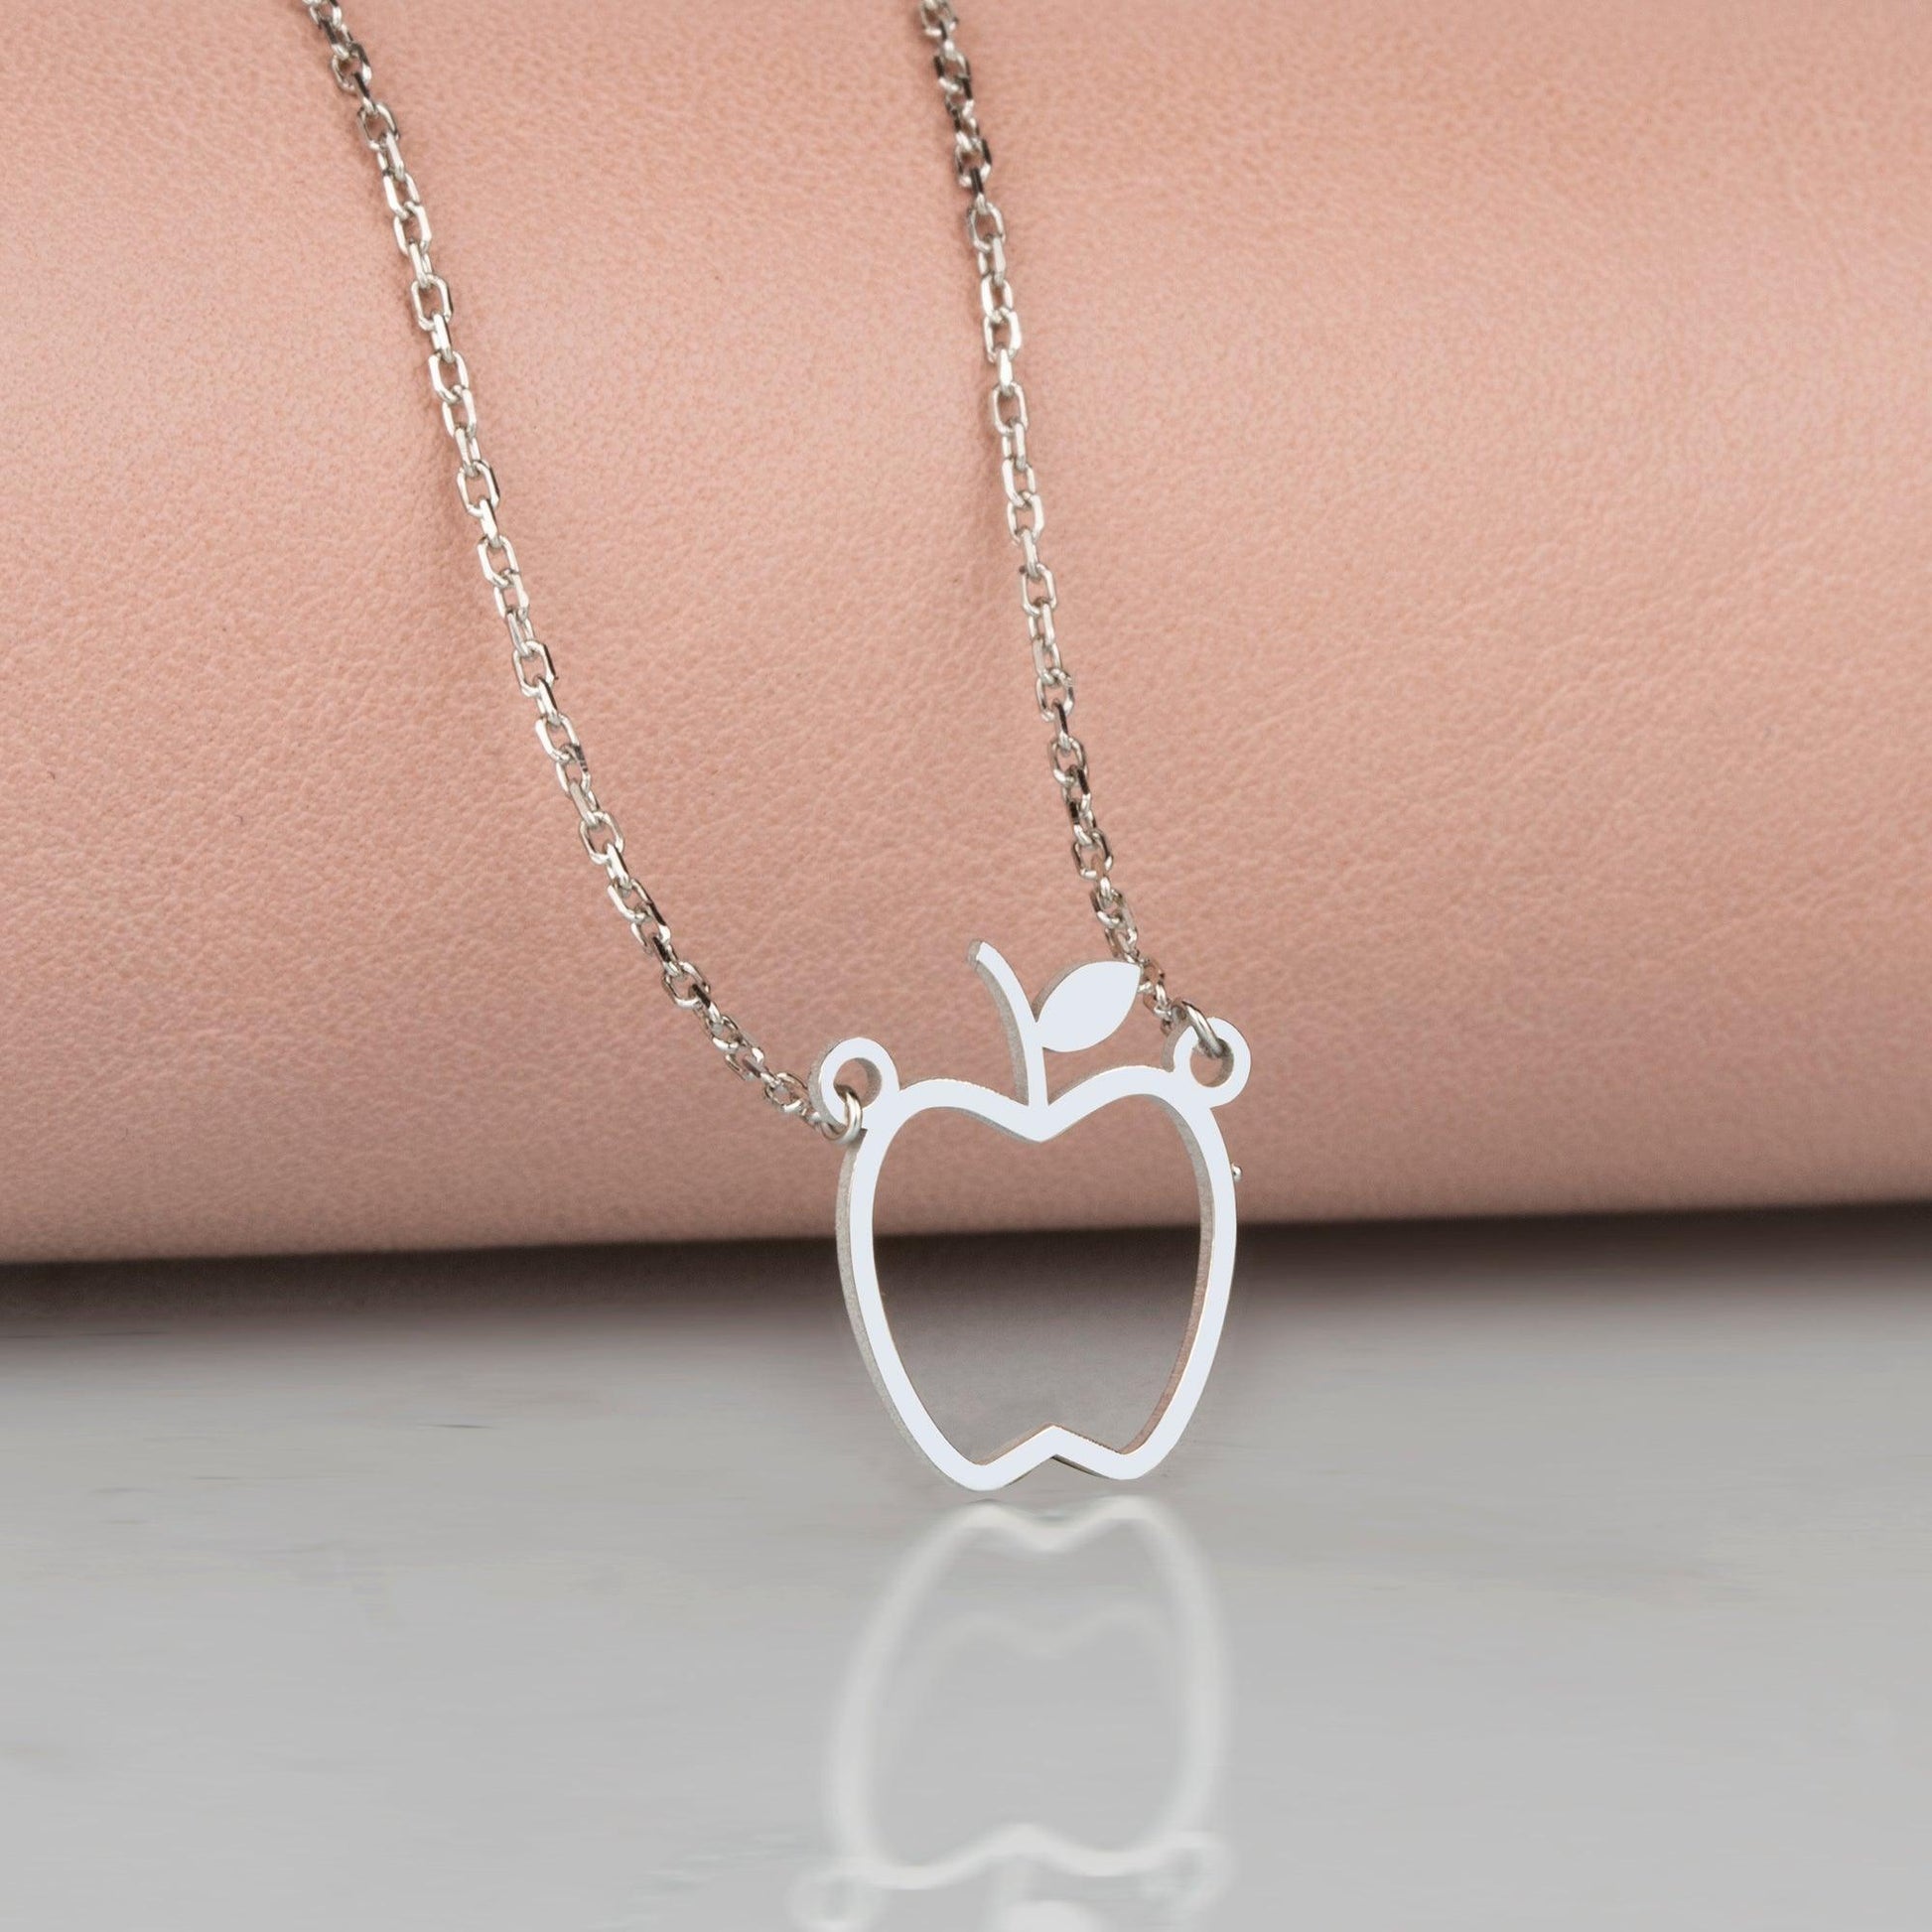 Apple Necklace, Valentine's Day, Dainty Open Apple Charm Necklace, Tiny Charm Necklace, Bridesmaid Gift.